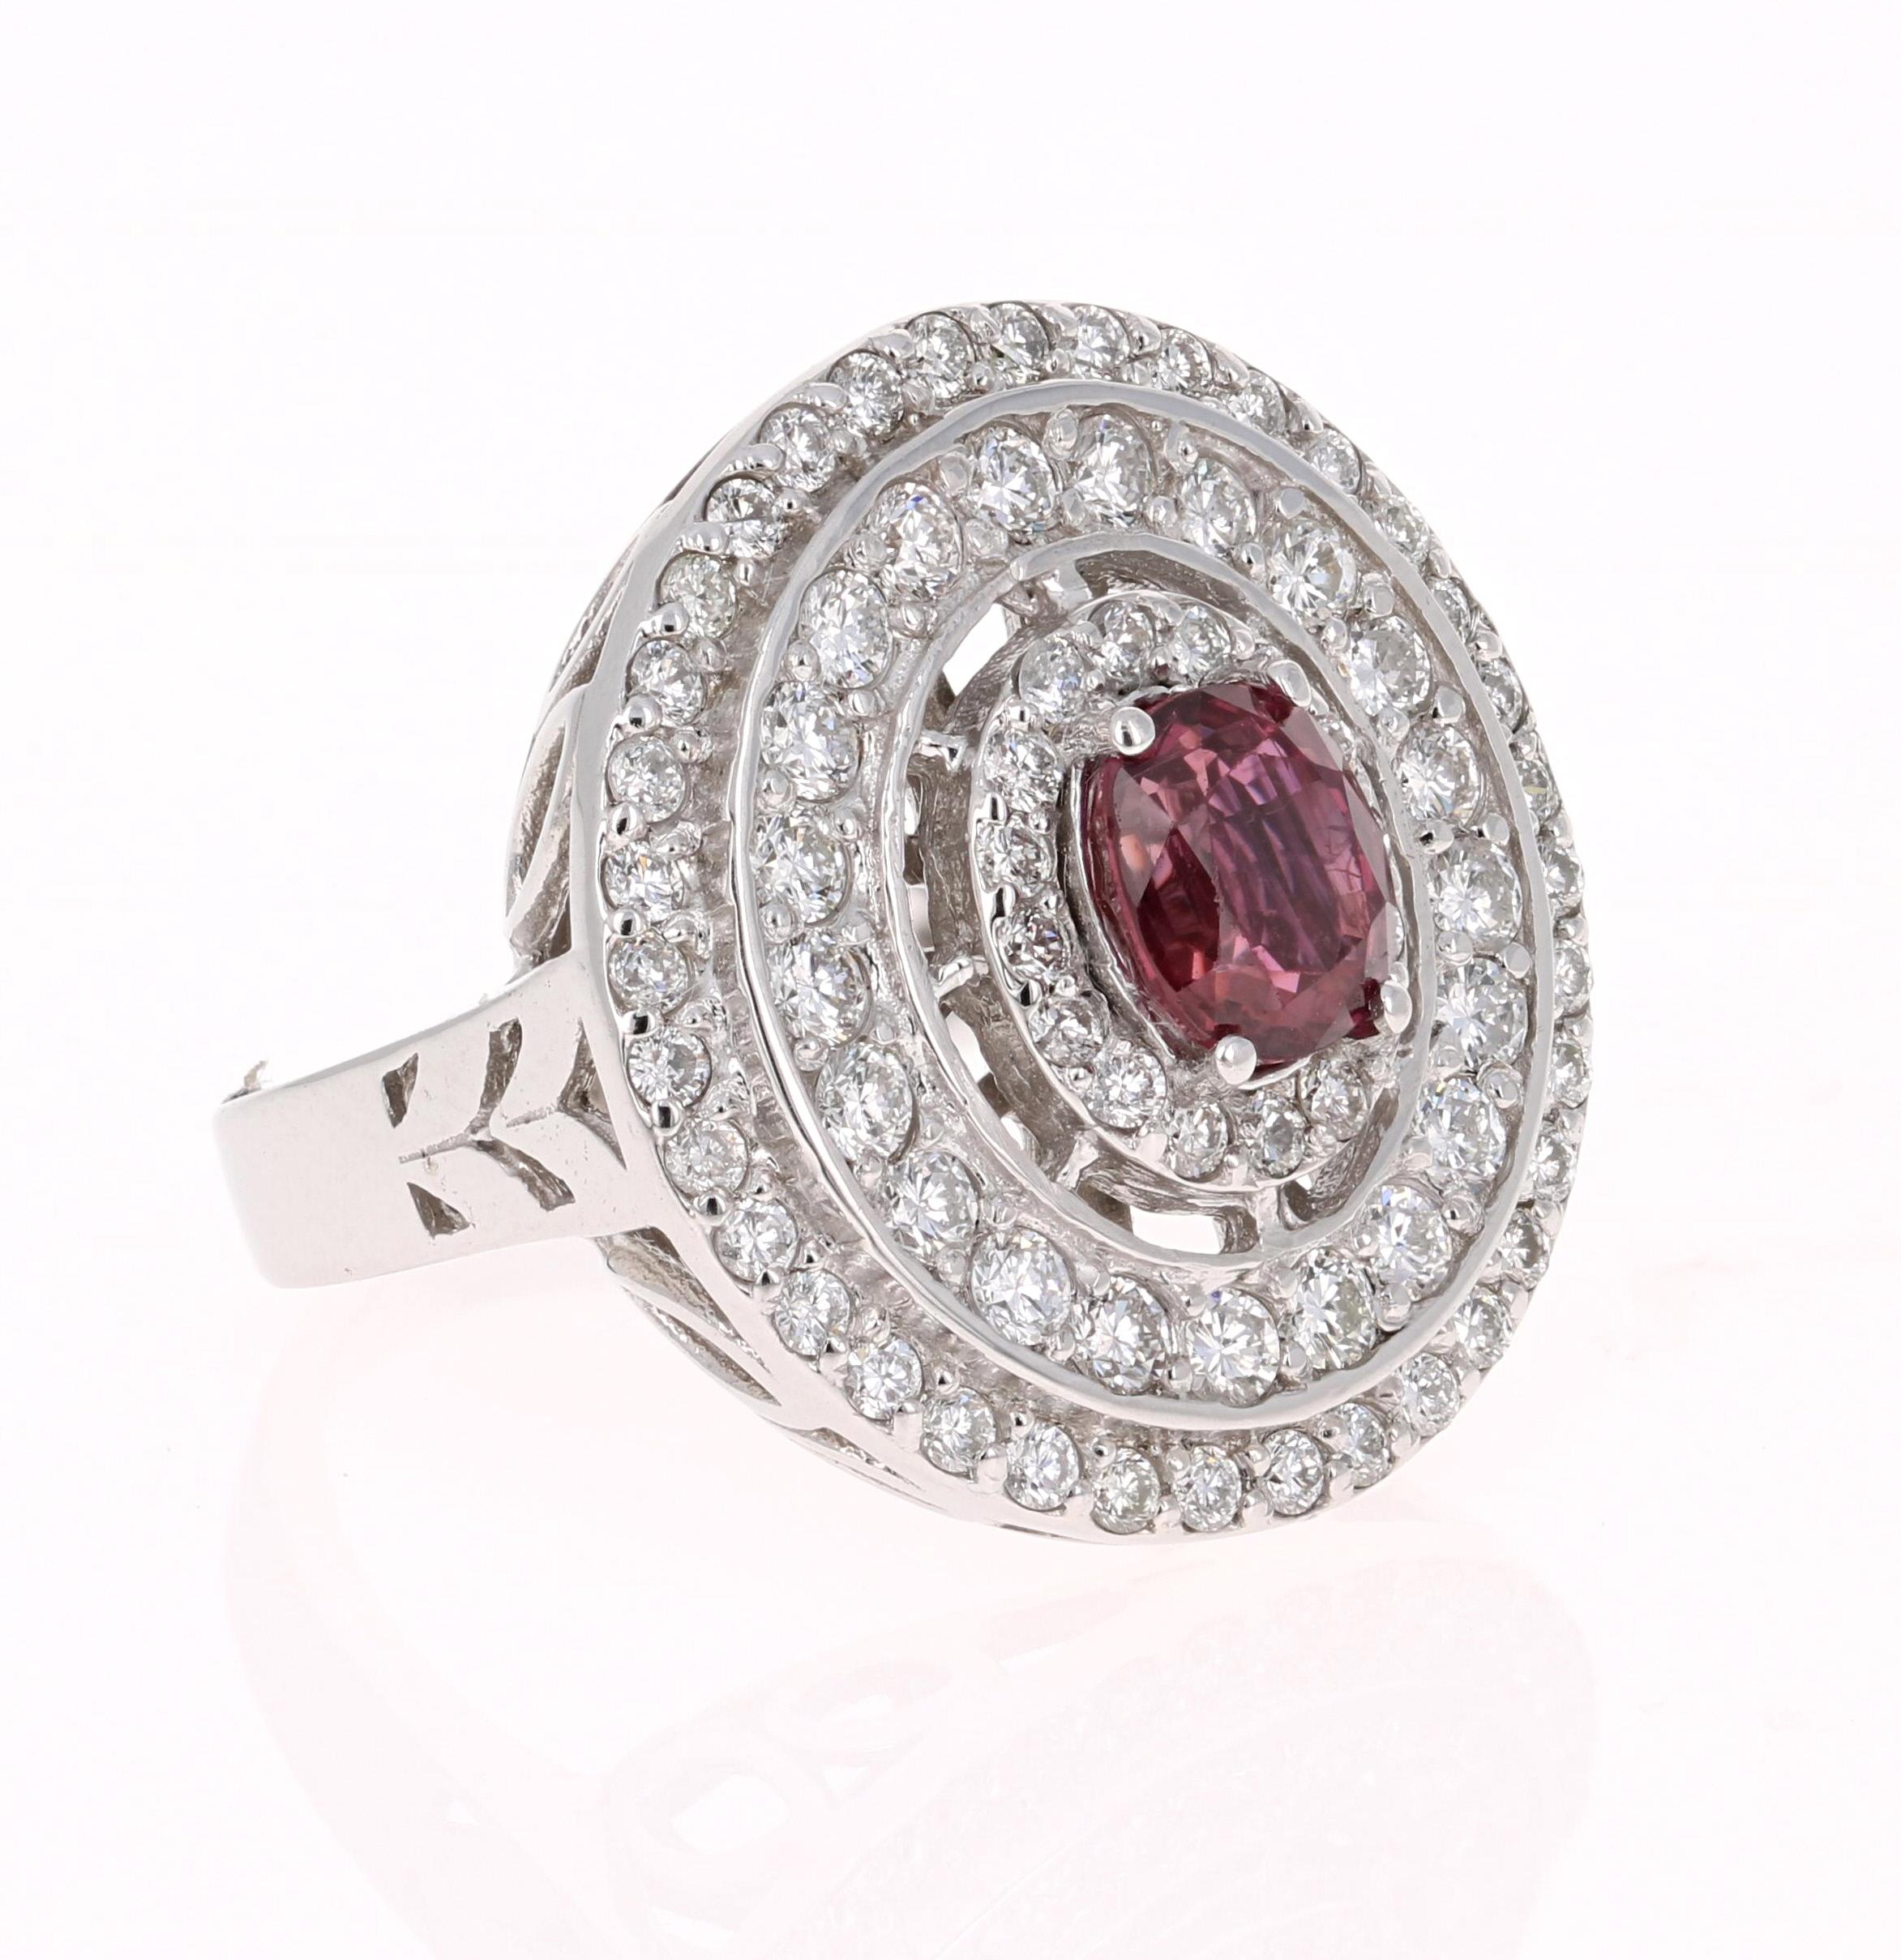 A real statement piece - Ruby and Diamond Cocktail Ring in 14K White Gold!
This ring has a gorgeous Burmese Oval Cut Ruby that weighs 1.20 carats in the center and is surrounded by 3 rows of 73 Round Cut Diamonds that weigh 1.21 carats (Clarity: